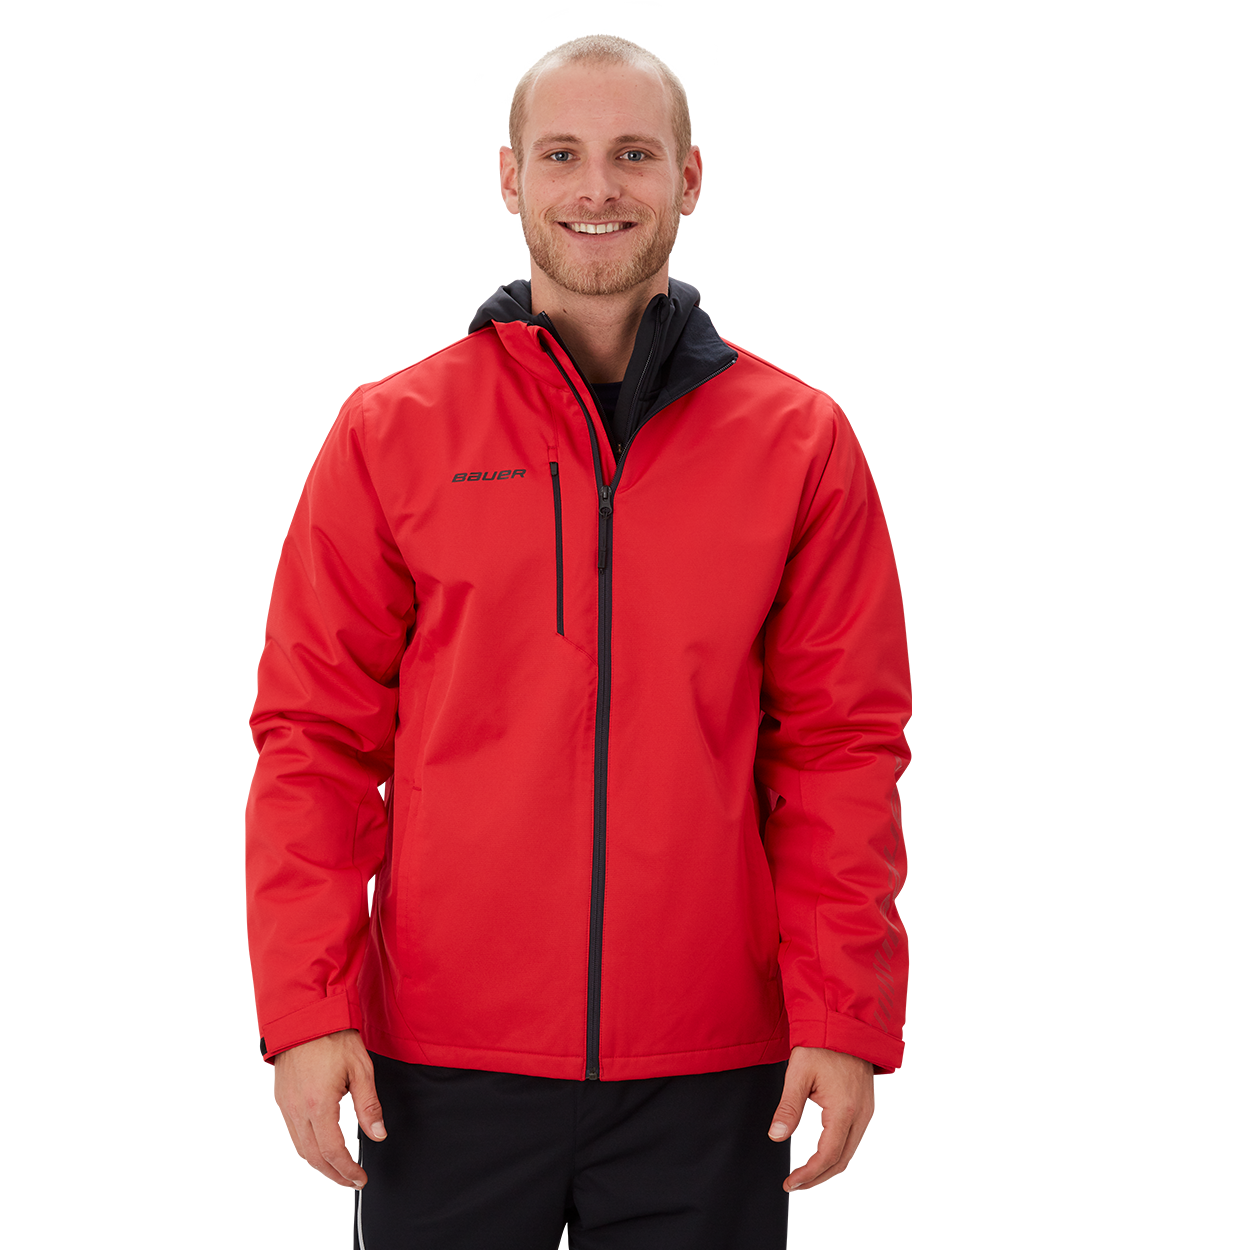 BAUER SUPREME MIDWEIGHT JACKET YOUTH